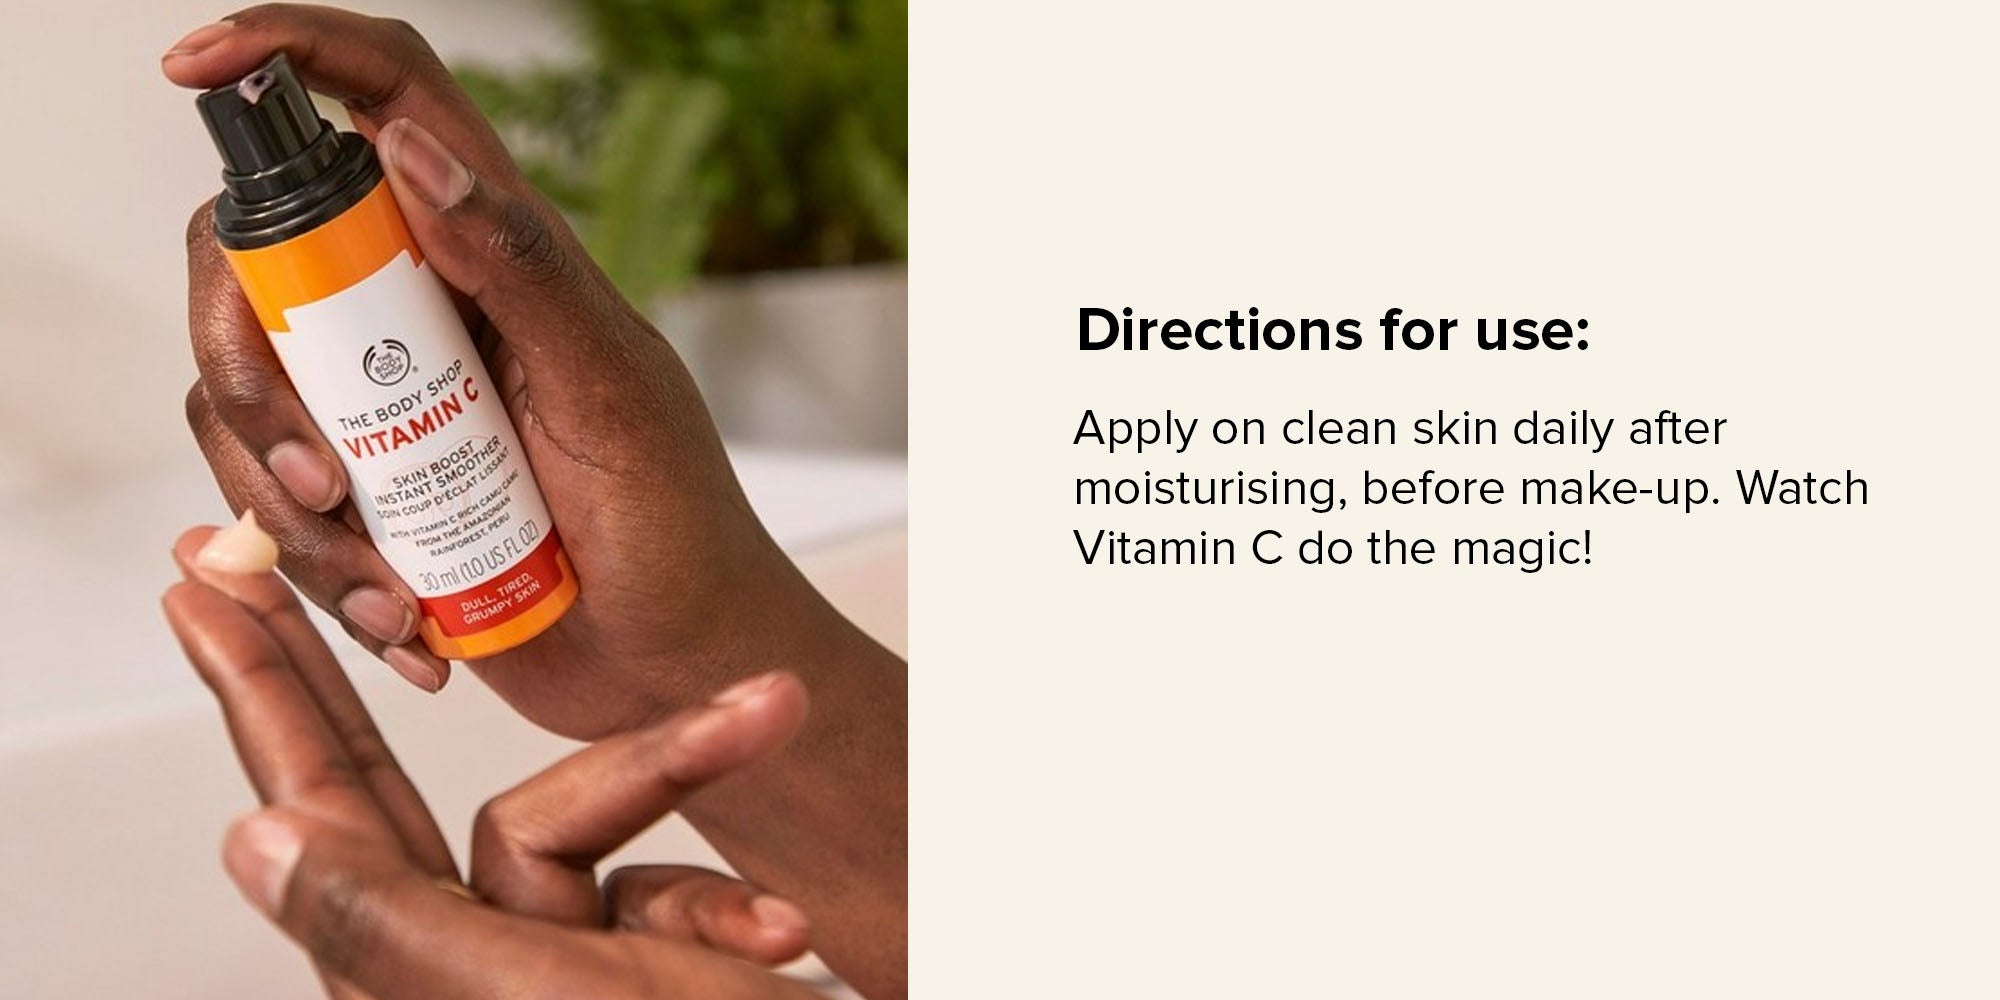 Vitamin C Skin Boost Instant Smoother | Moisturizers